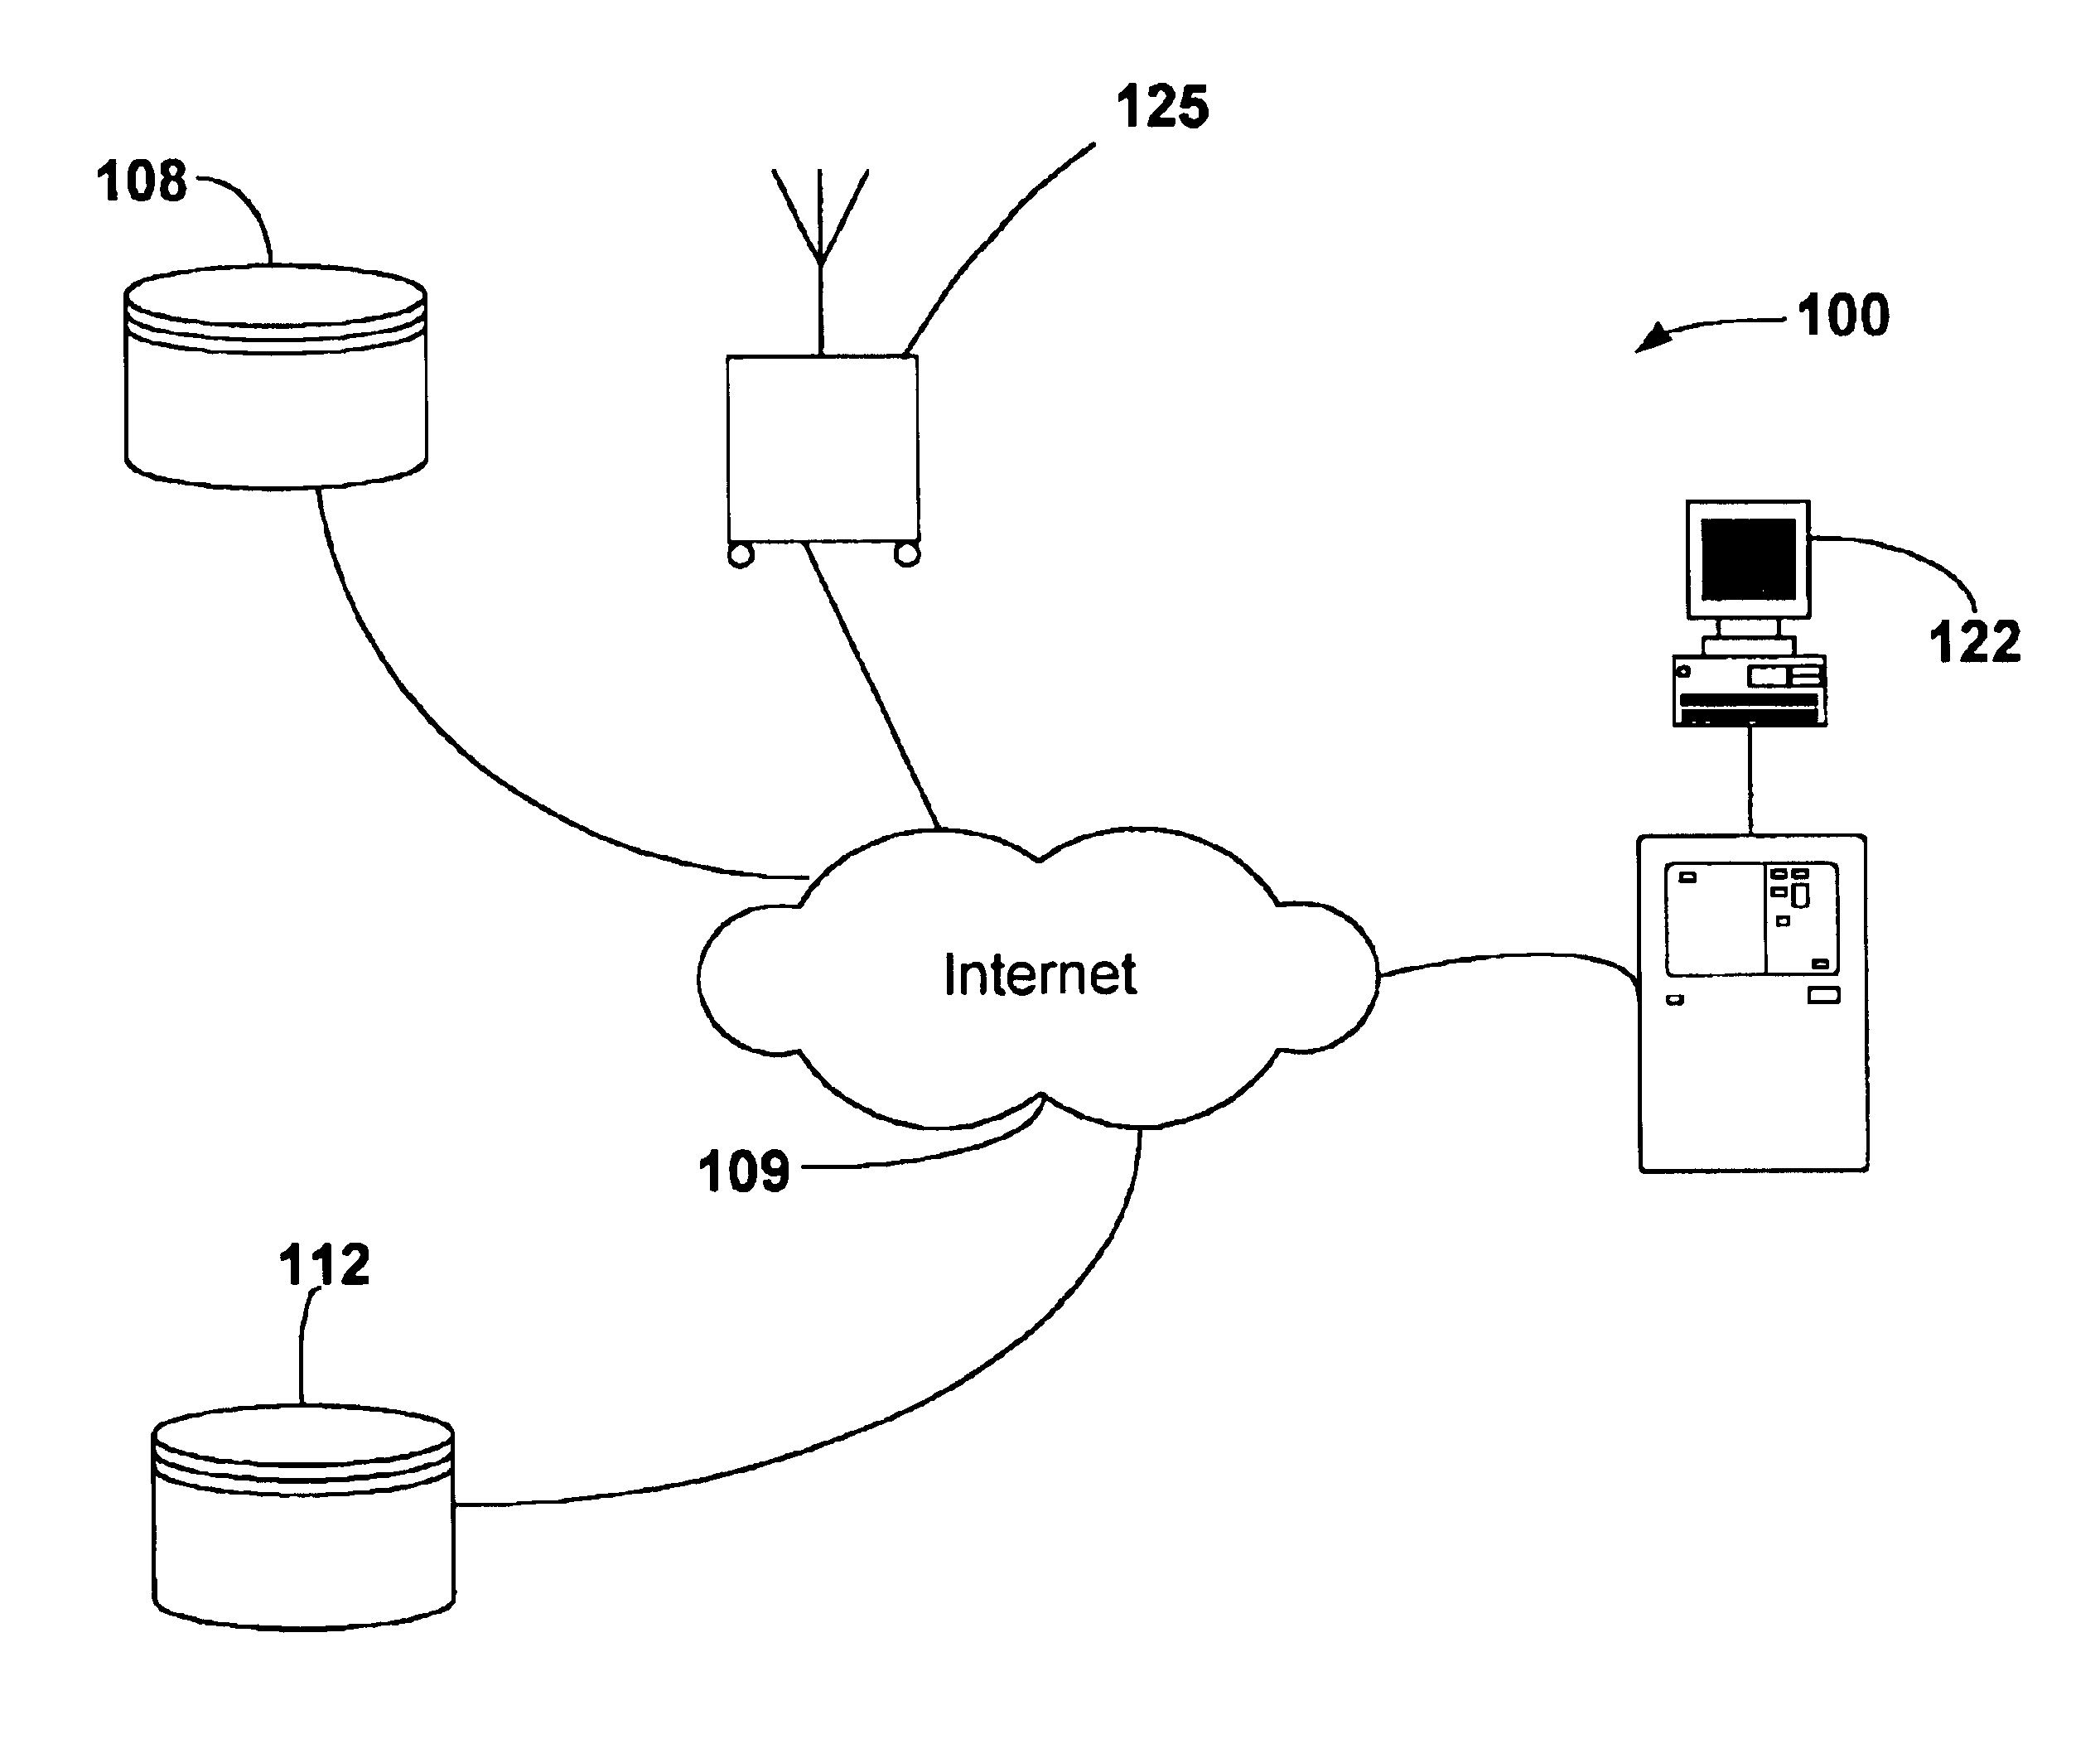 Multiple sensing system and device